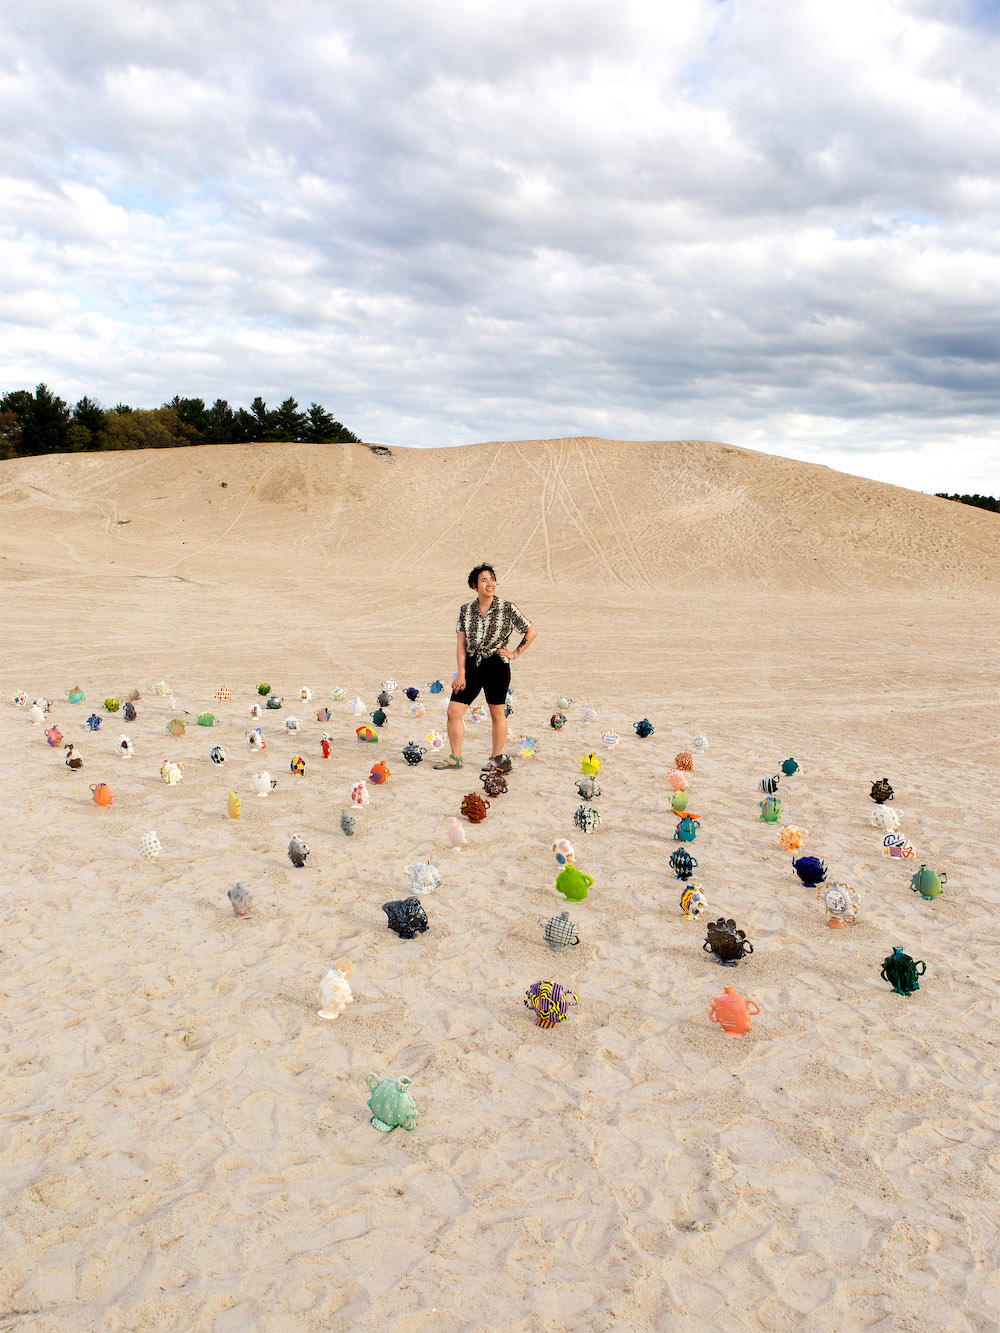 Jolie Ngo, "100 Vases," photo by Rena Rong, courtesy to the artist.